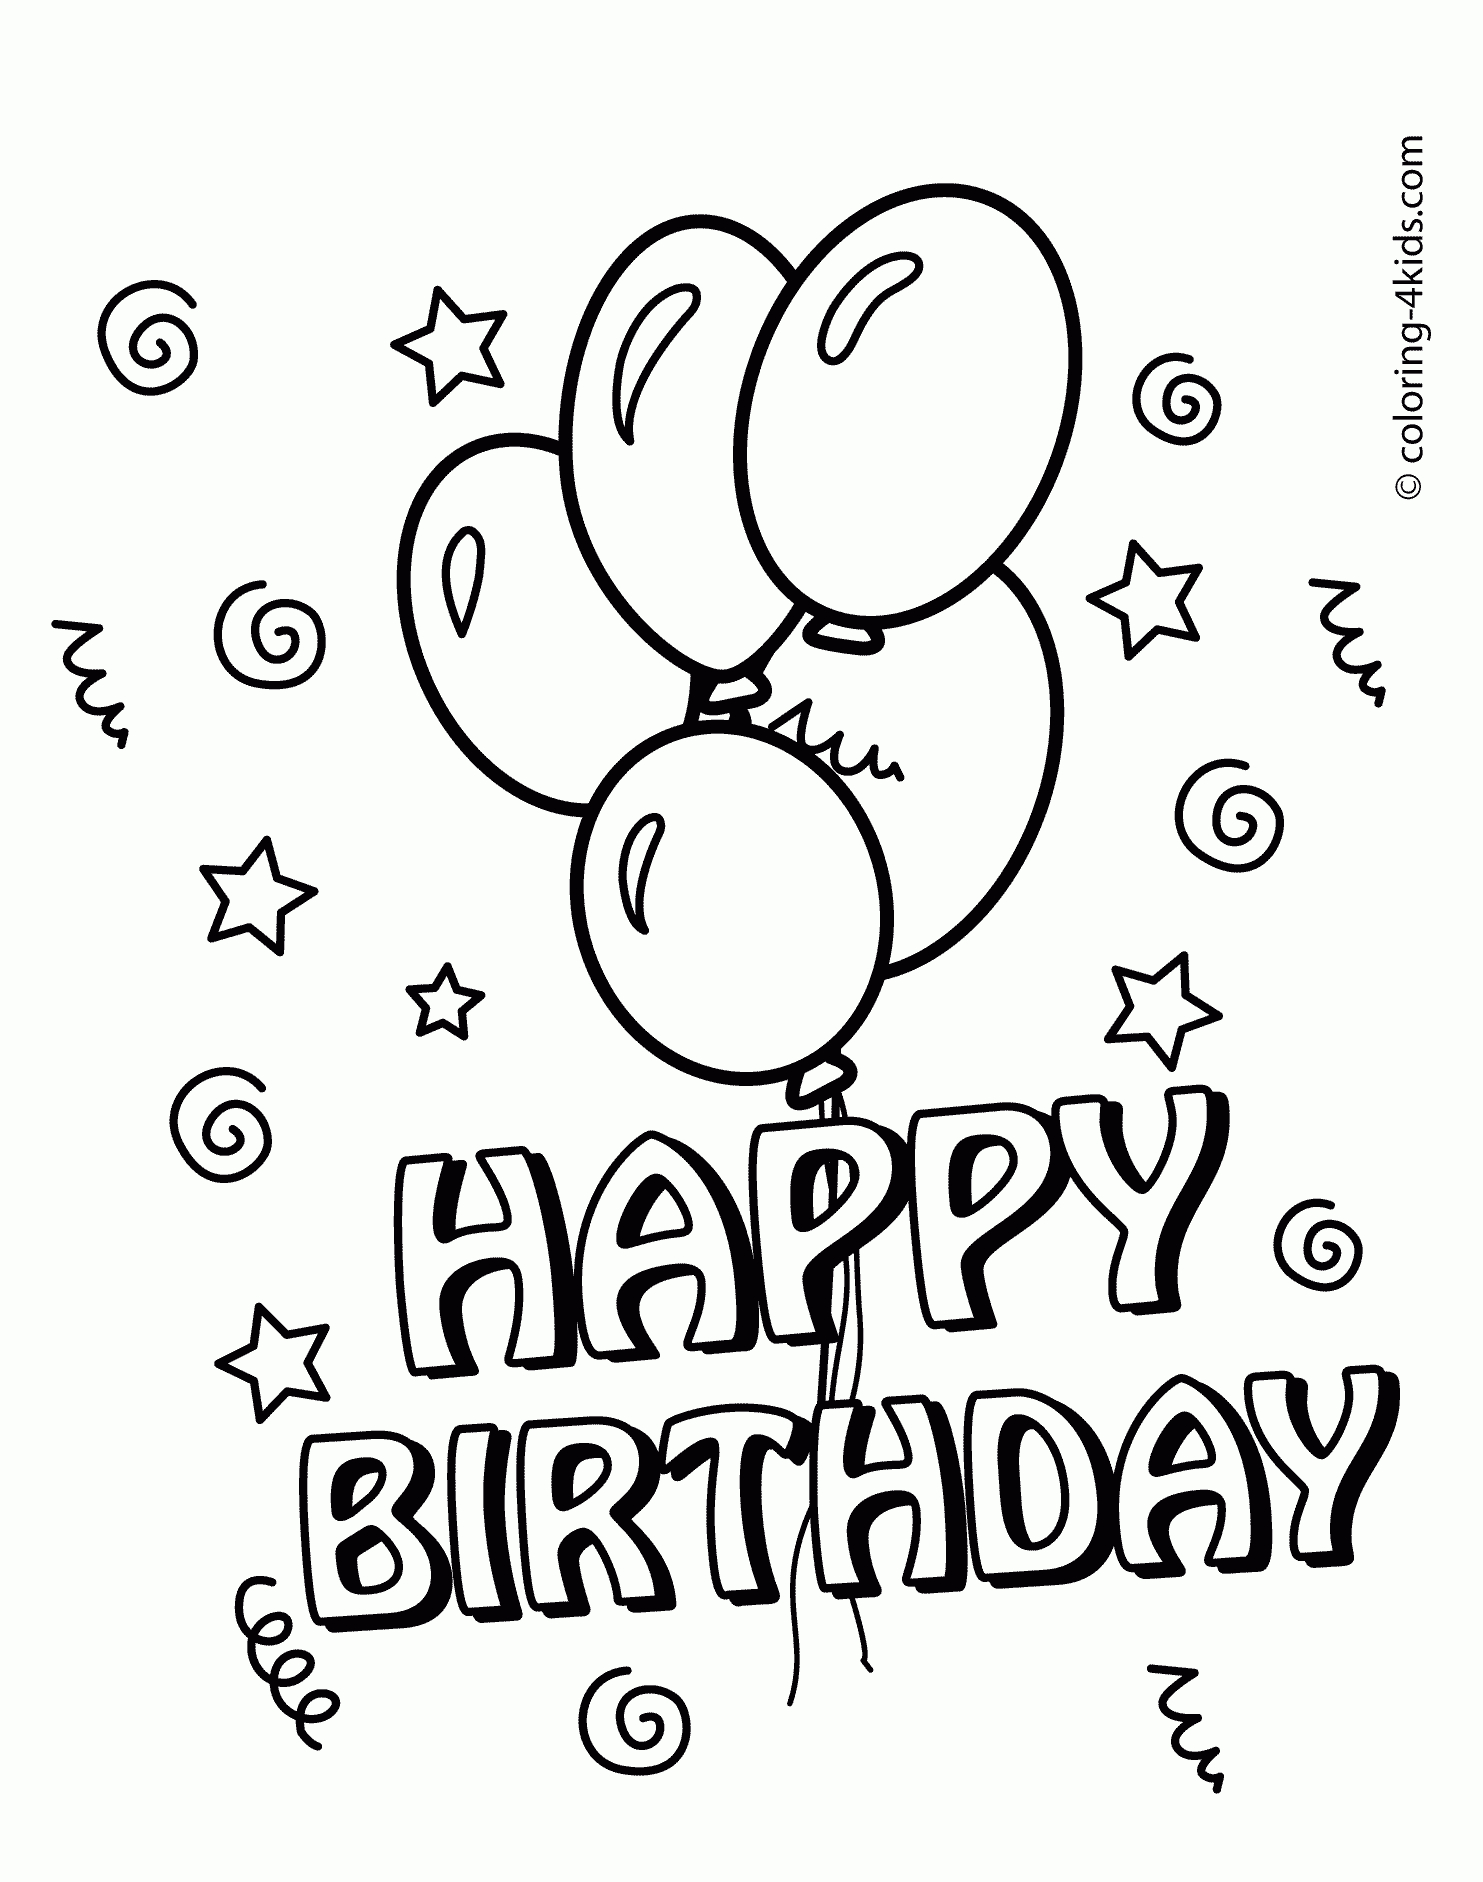 Happy Birthday Coloring Pages With Balloons For Kids | Coloring - Free Printable Happy Birthday Cards In Spanish